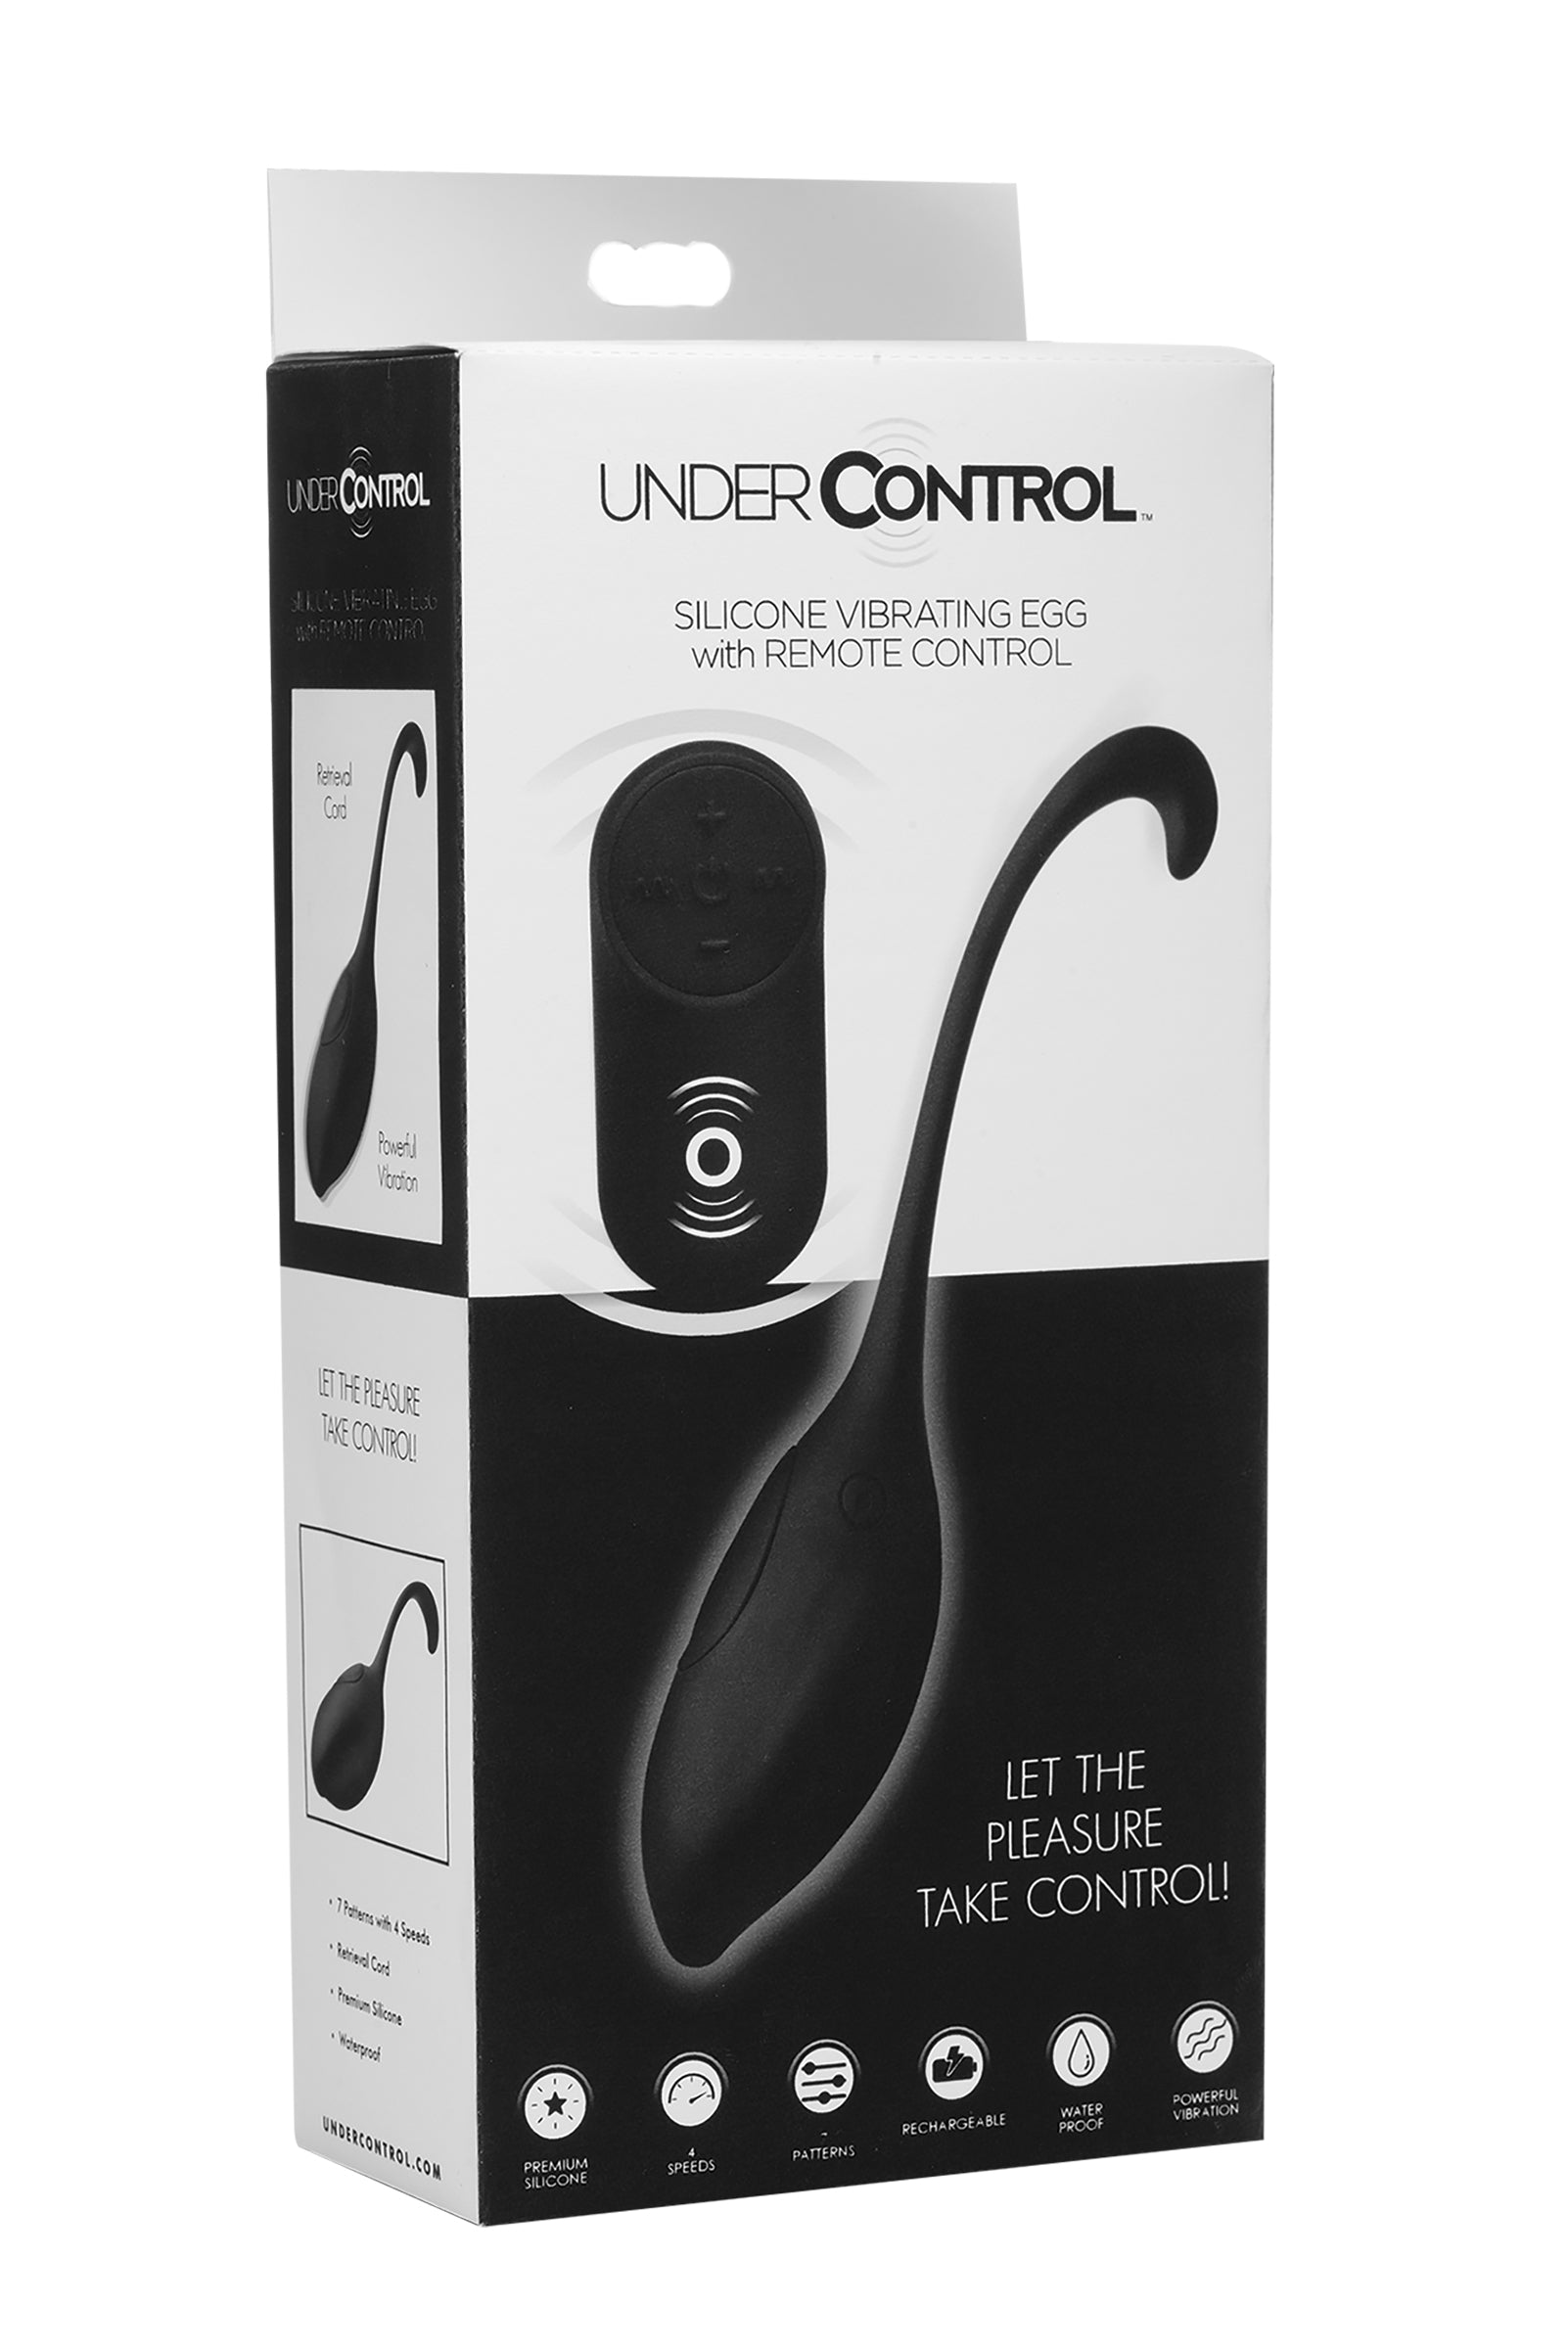 Silicone Vibrating Egg with Remote Control